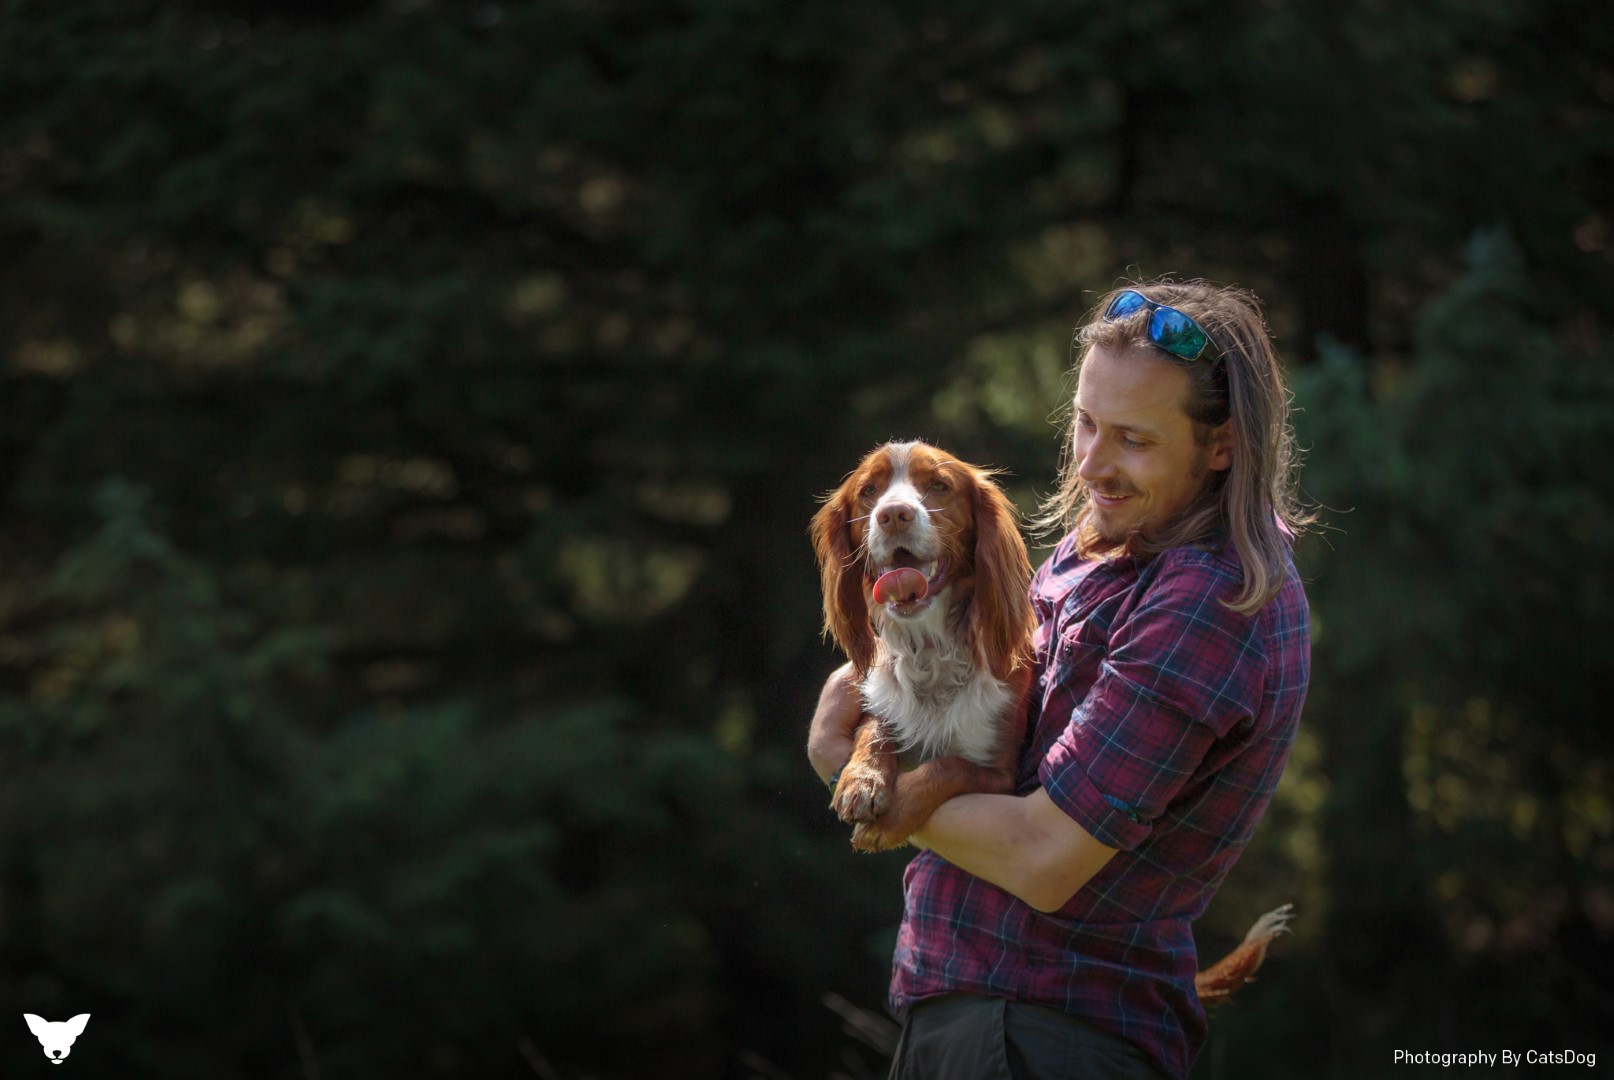 A man with long hair holding a dog